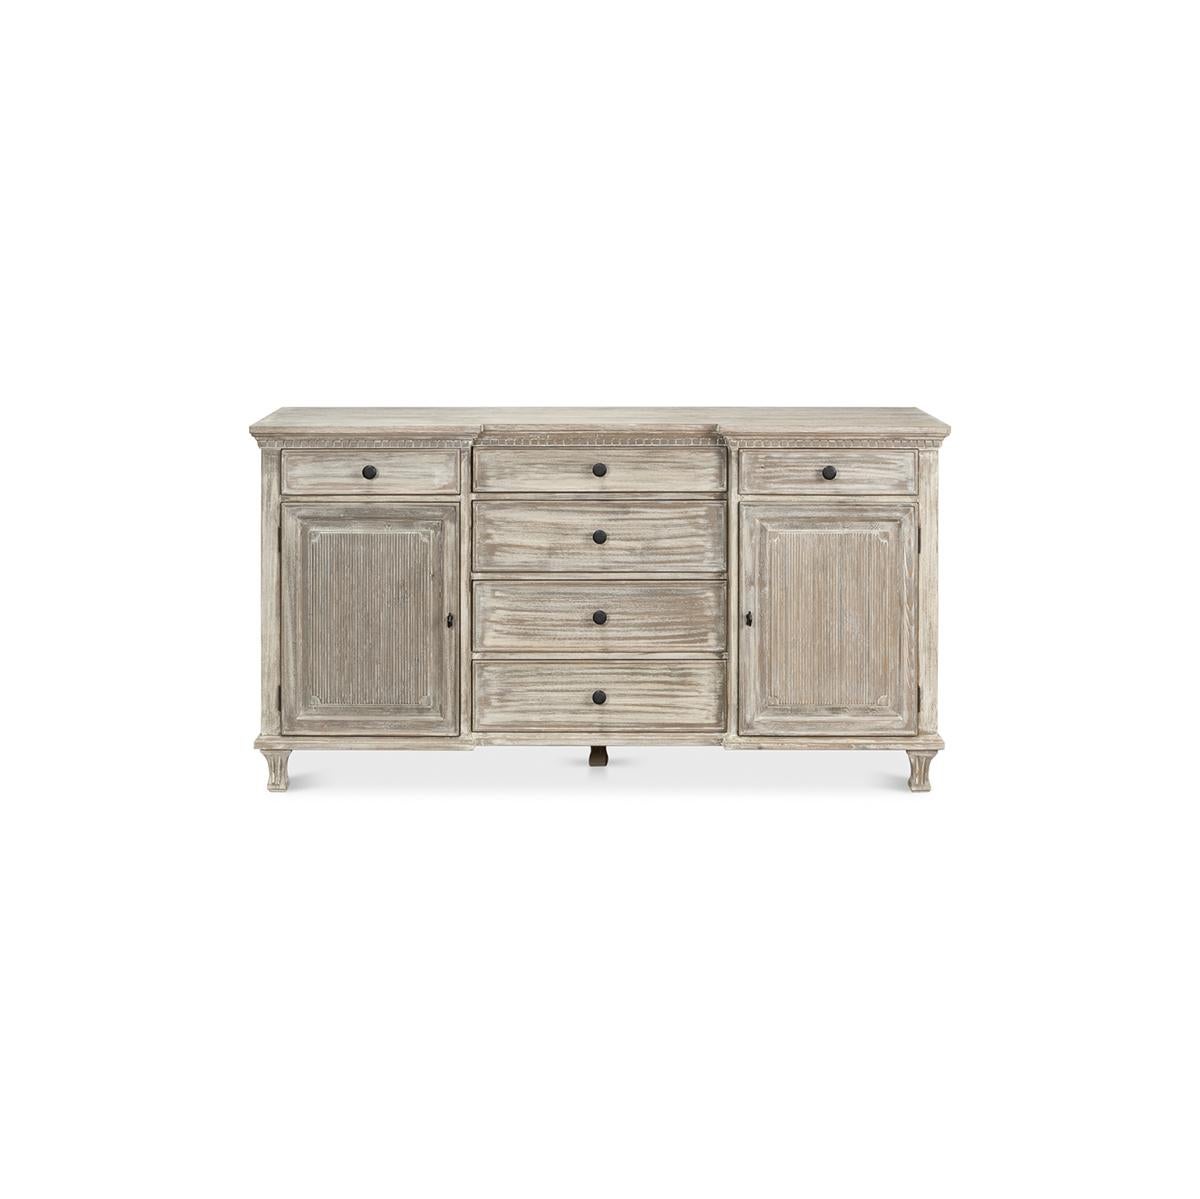 With six drawers and two raised panel doors, the Buffet is a blend of service, style, and excellence all in one package. Finished in our Moonskin finish, this workhorse buffet will add style and drama to any living or dining environment. With ample